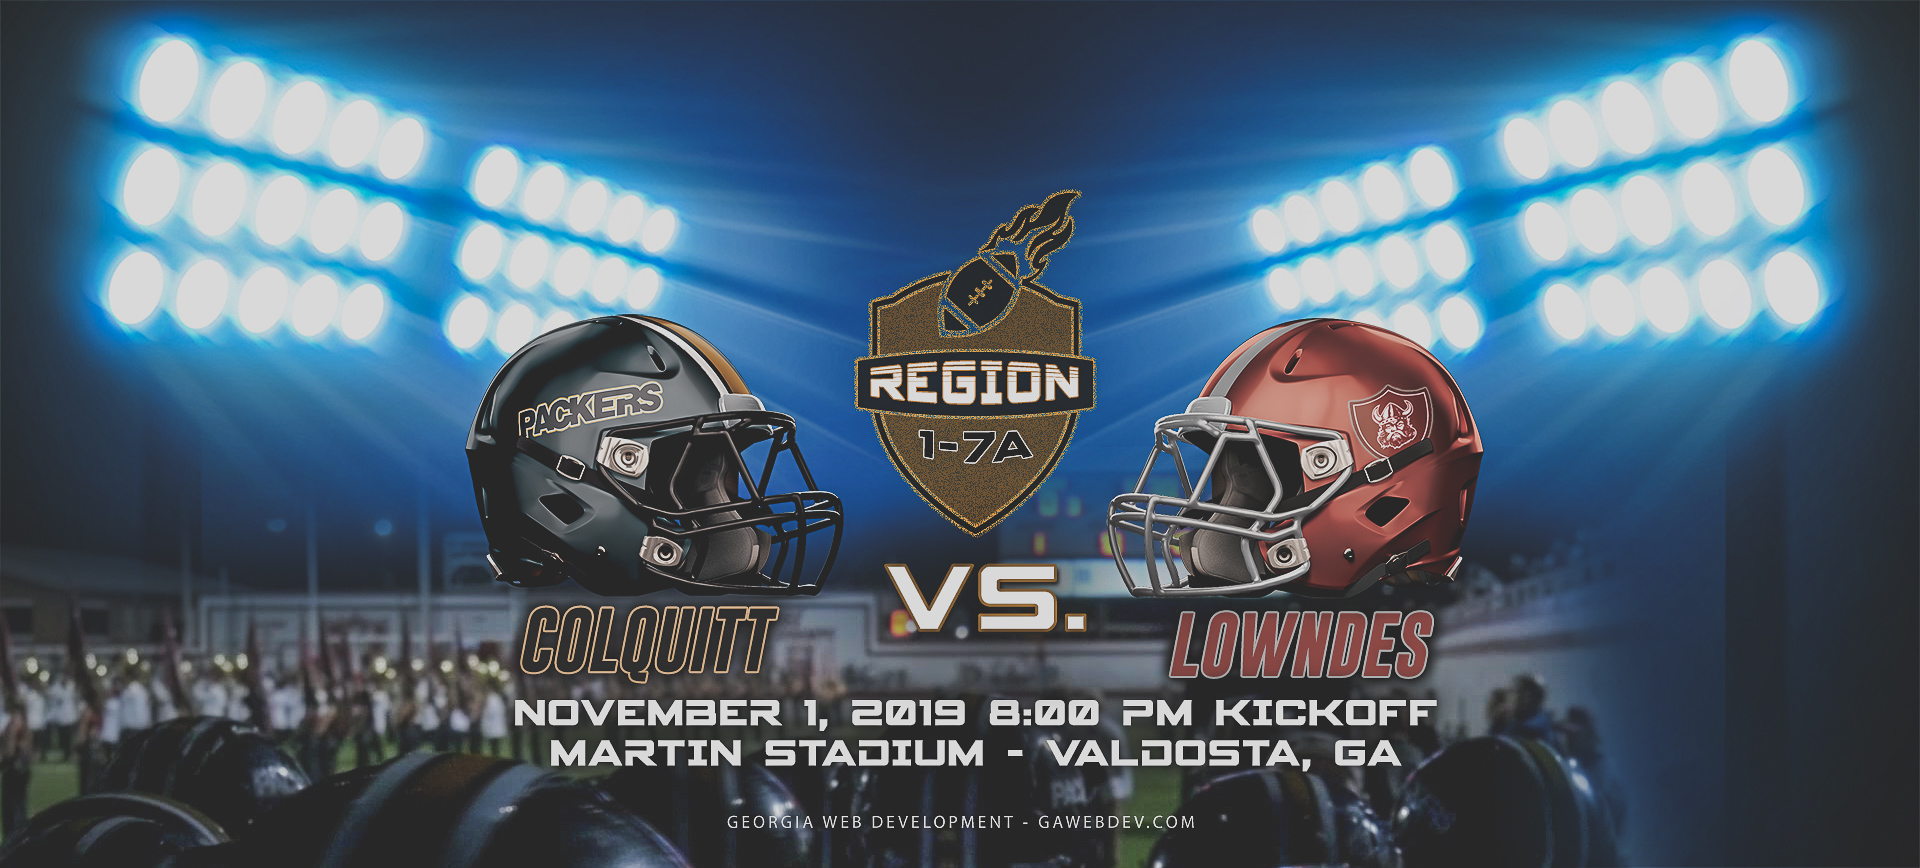 Colquitt County Packers vs. Lowndes Vikings 2019 - Colquitt Ticket Info